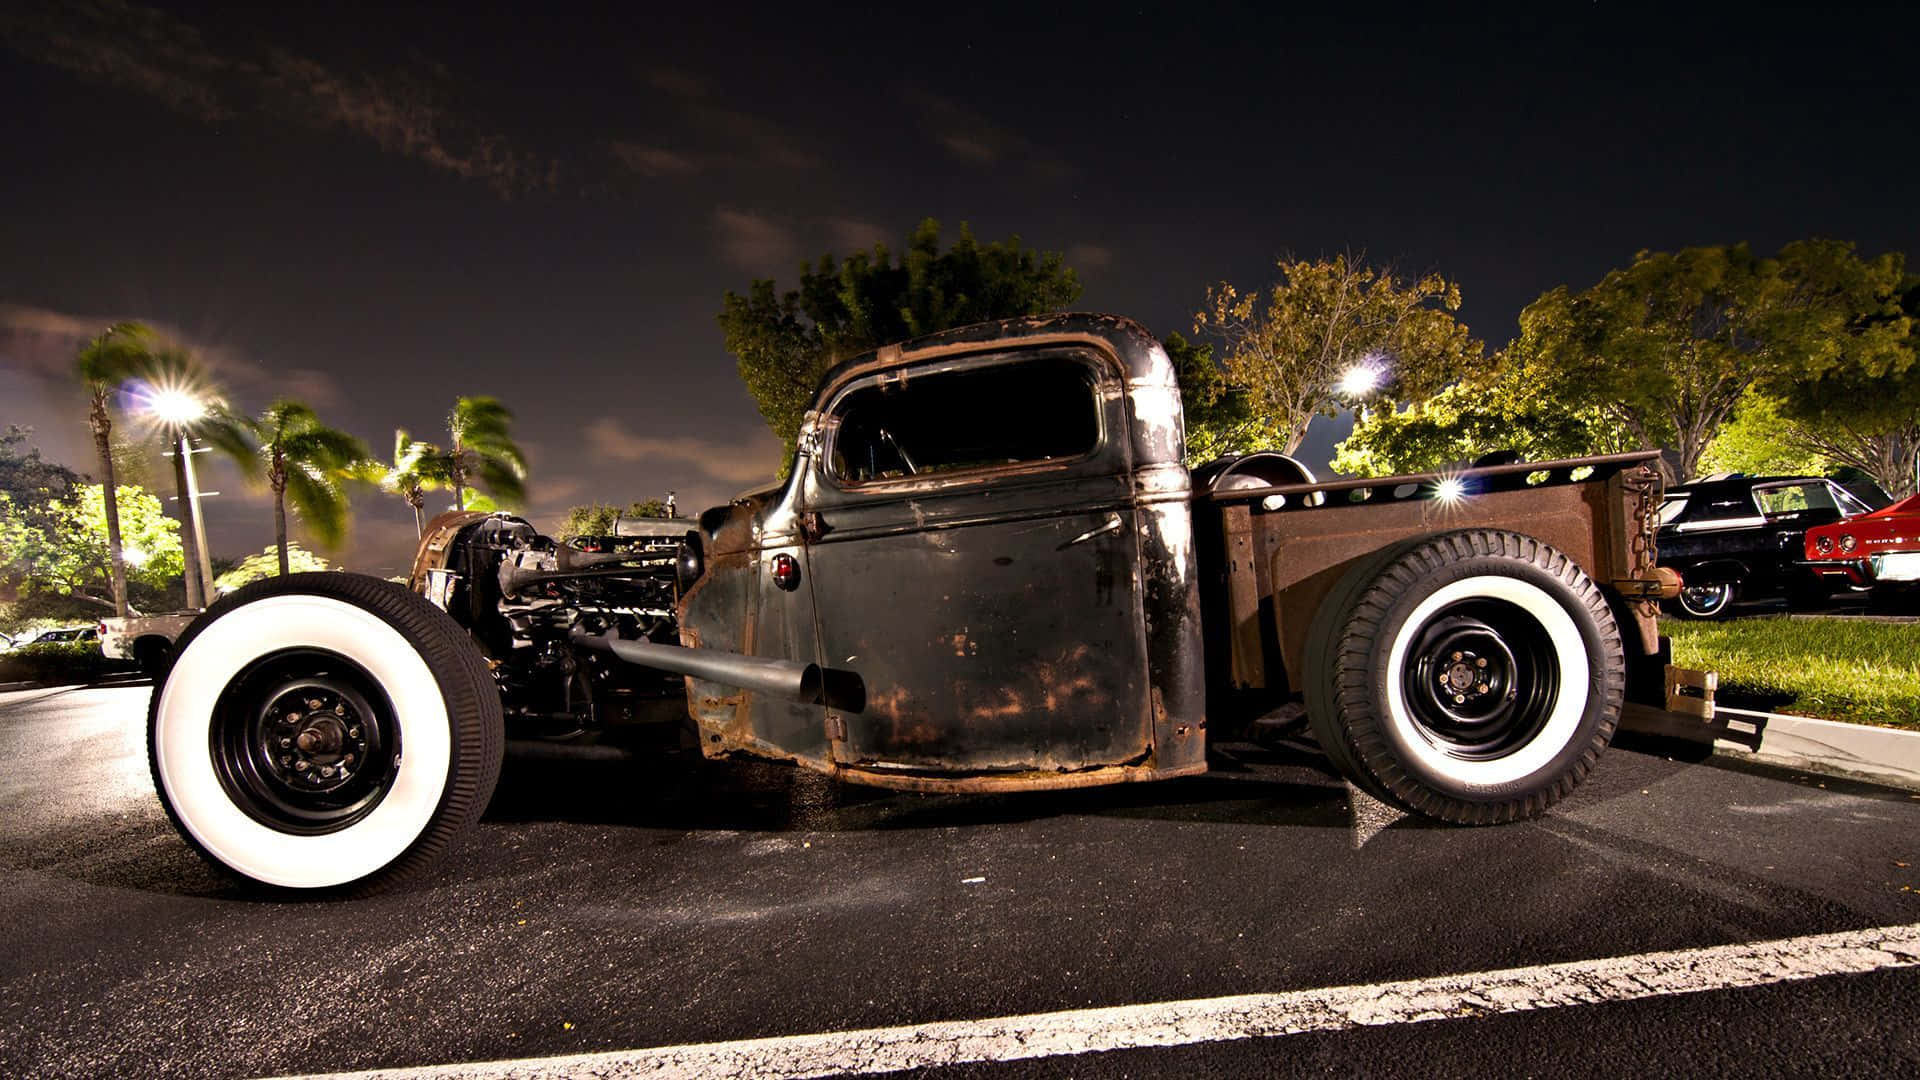 Get Ready to Cruise in This Hot Rod Wallpaper